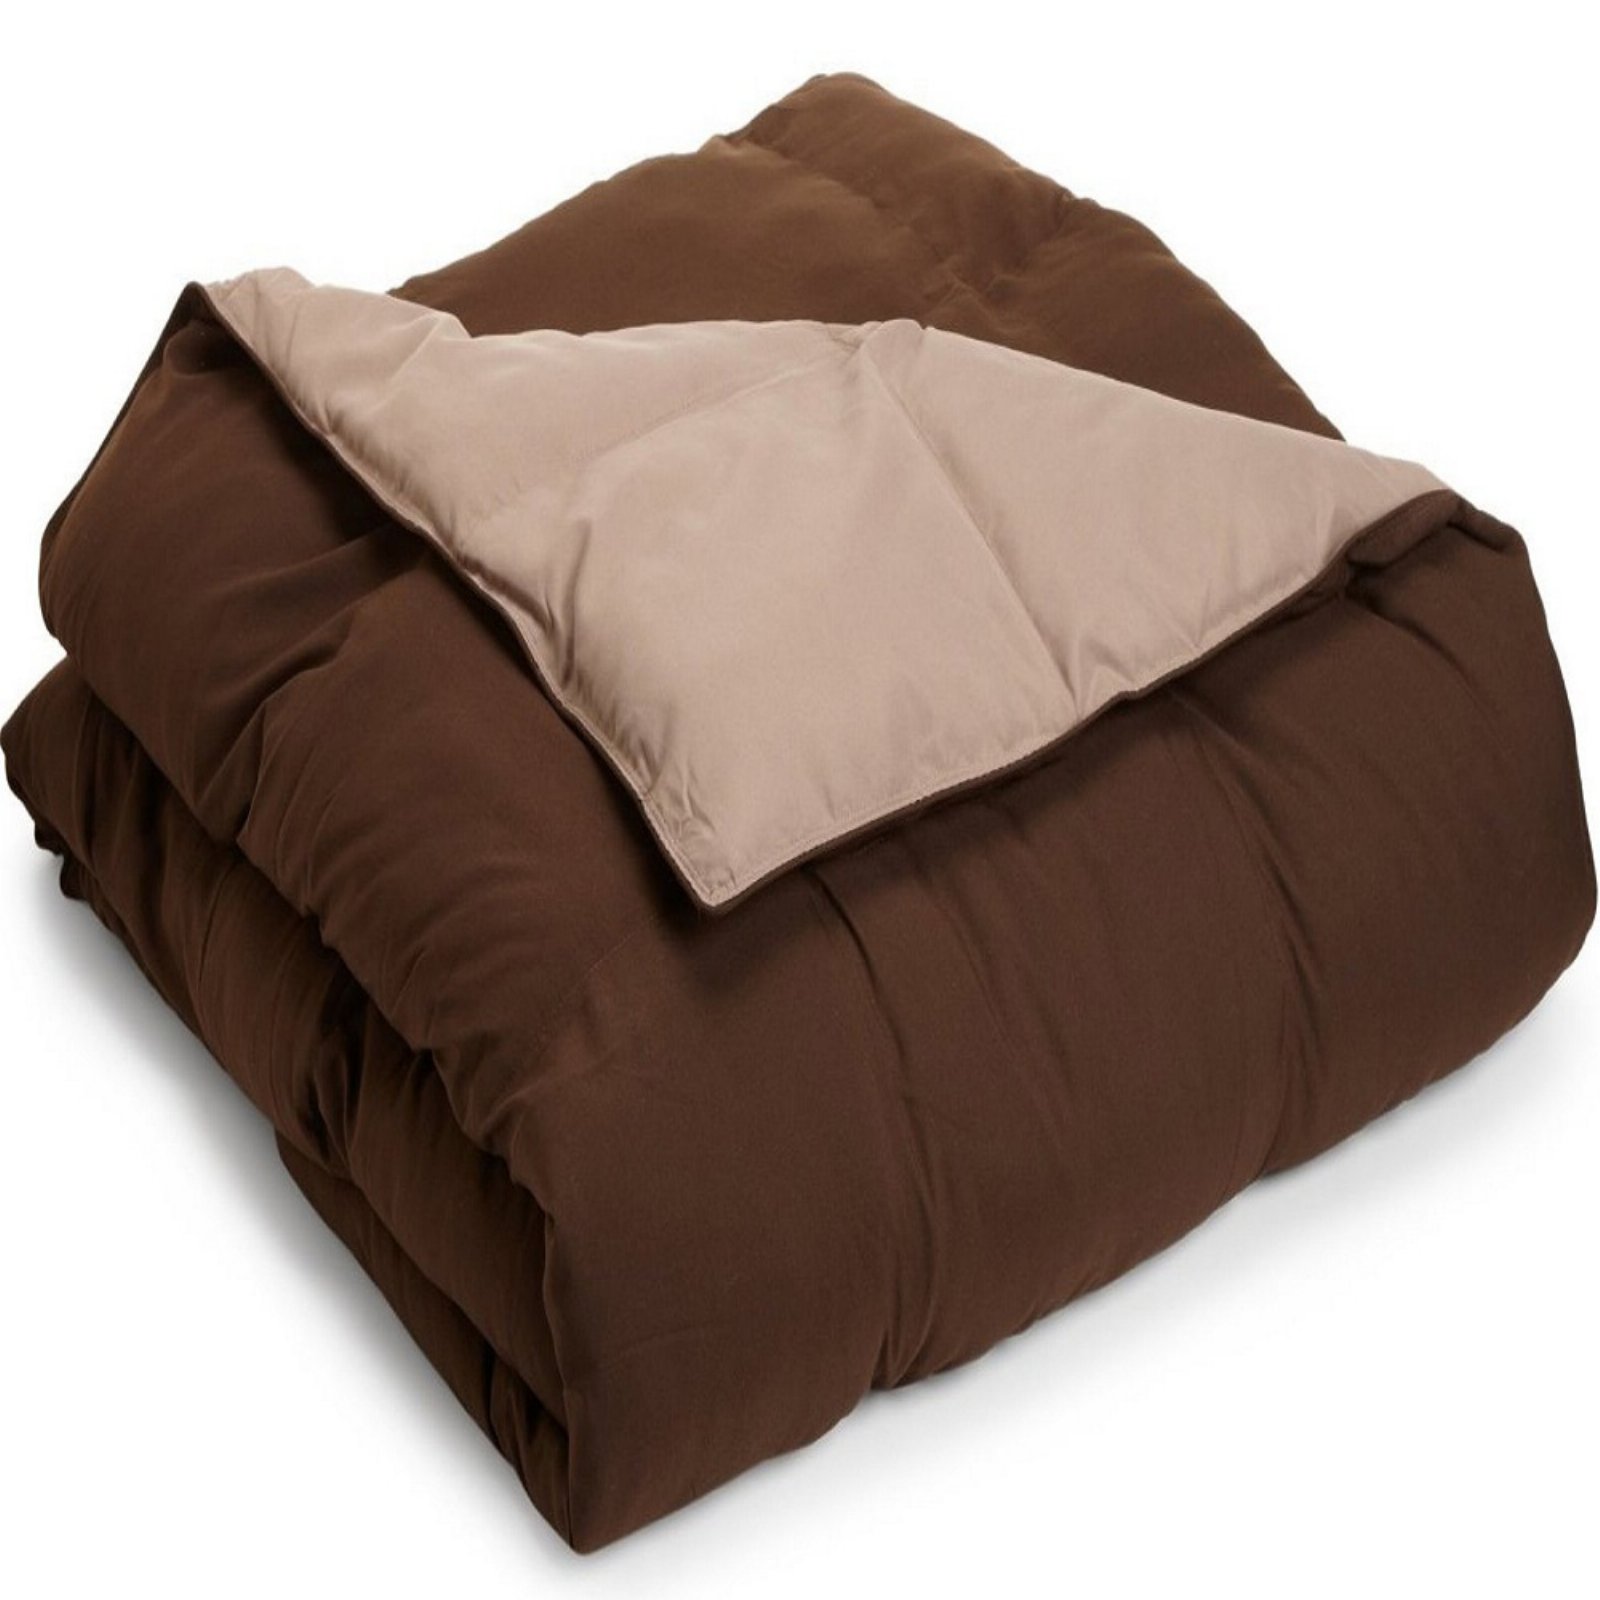 Superior Down Alternative Reversible Comforter, King, Taupe/ Choco - image 2 of 2